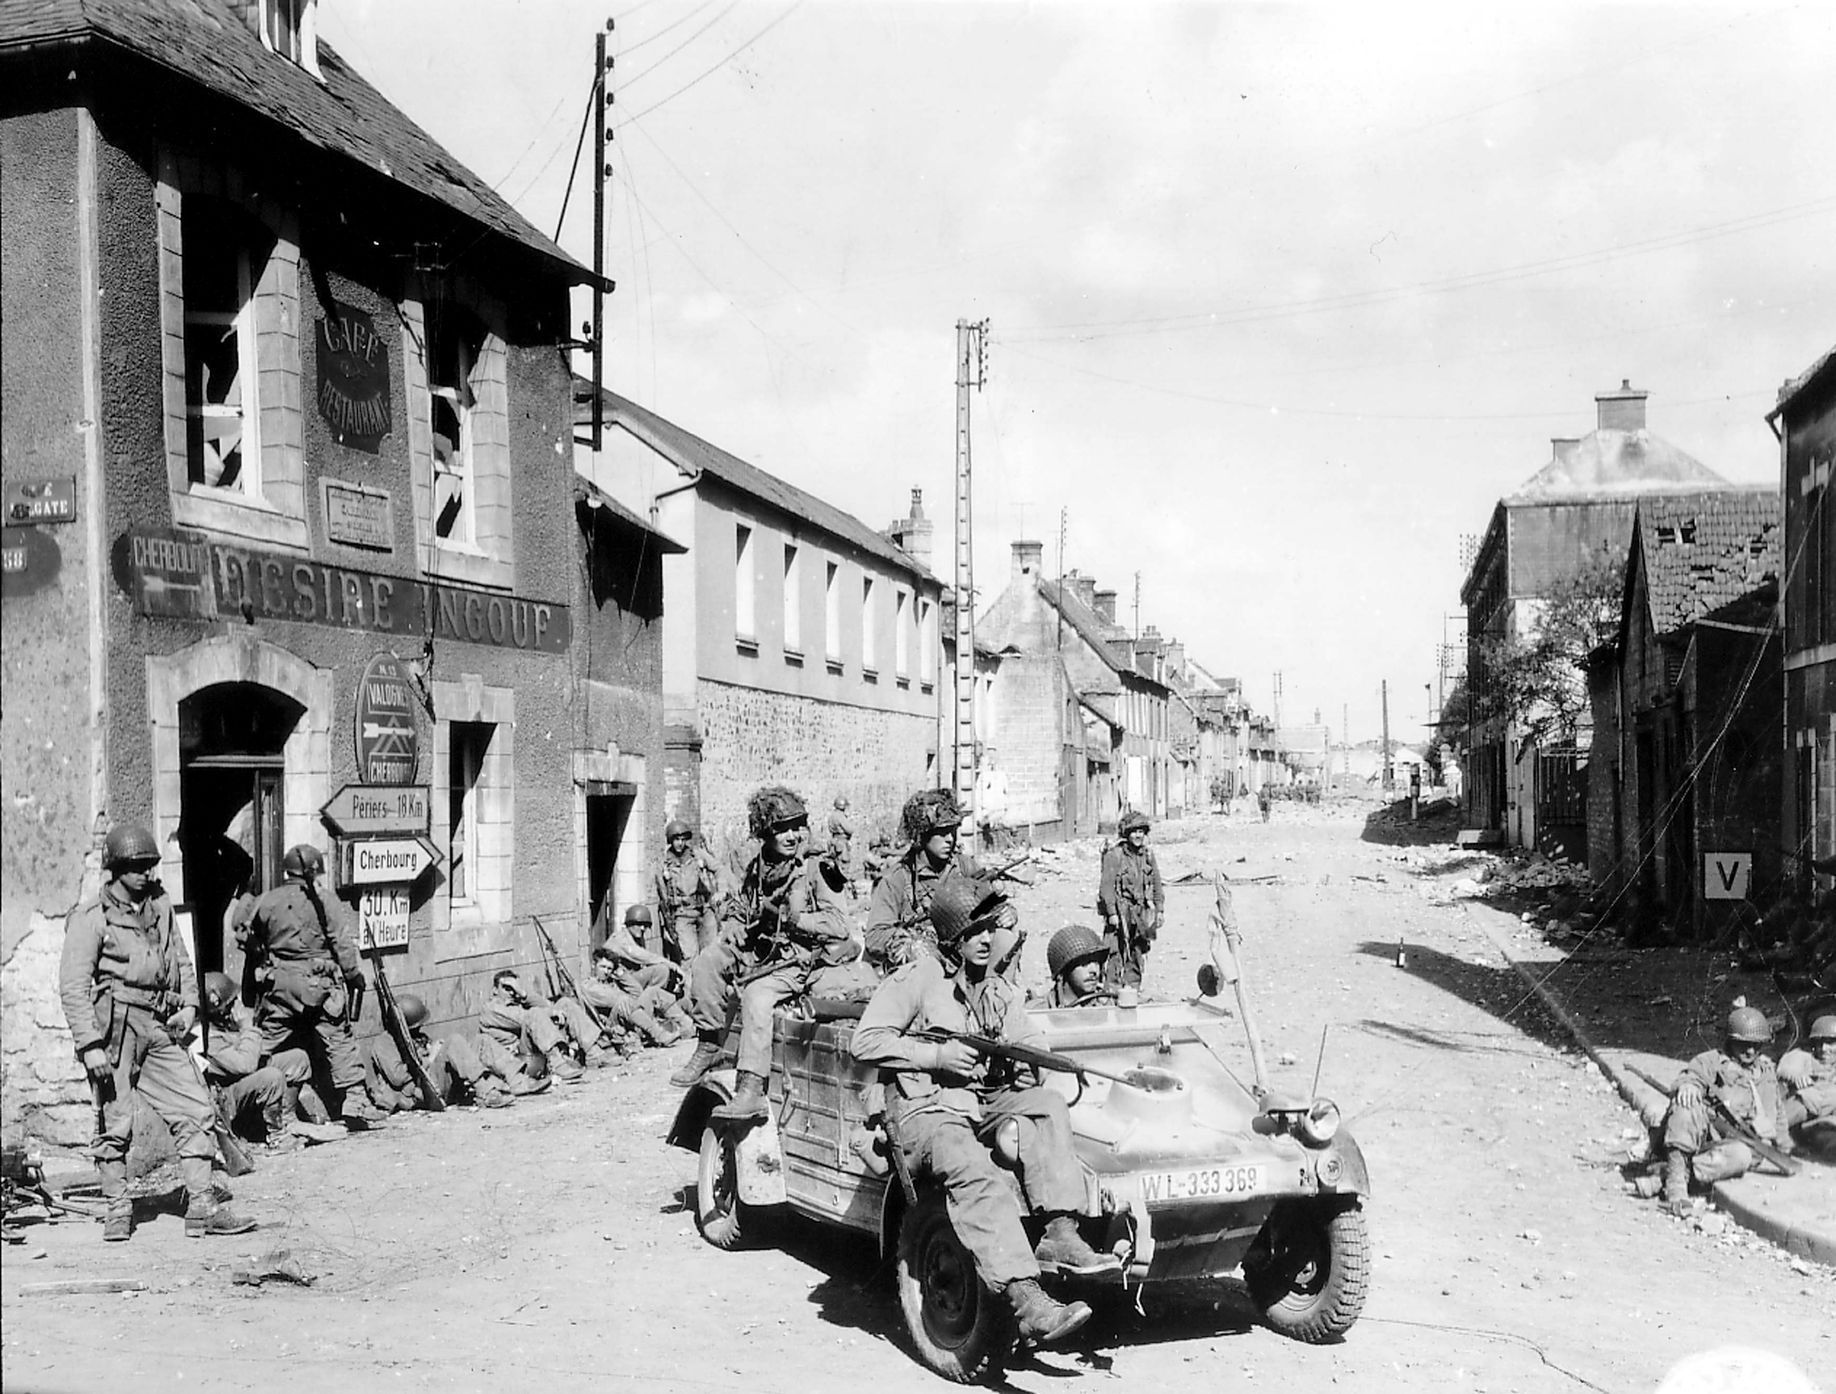 Handout photo of U.S. Army paratroopers of the 101st Airborne Division driving a captured German Kubelwagen on D-Day in Carentan